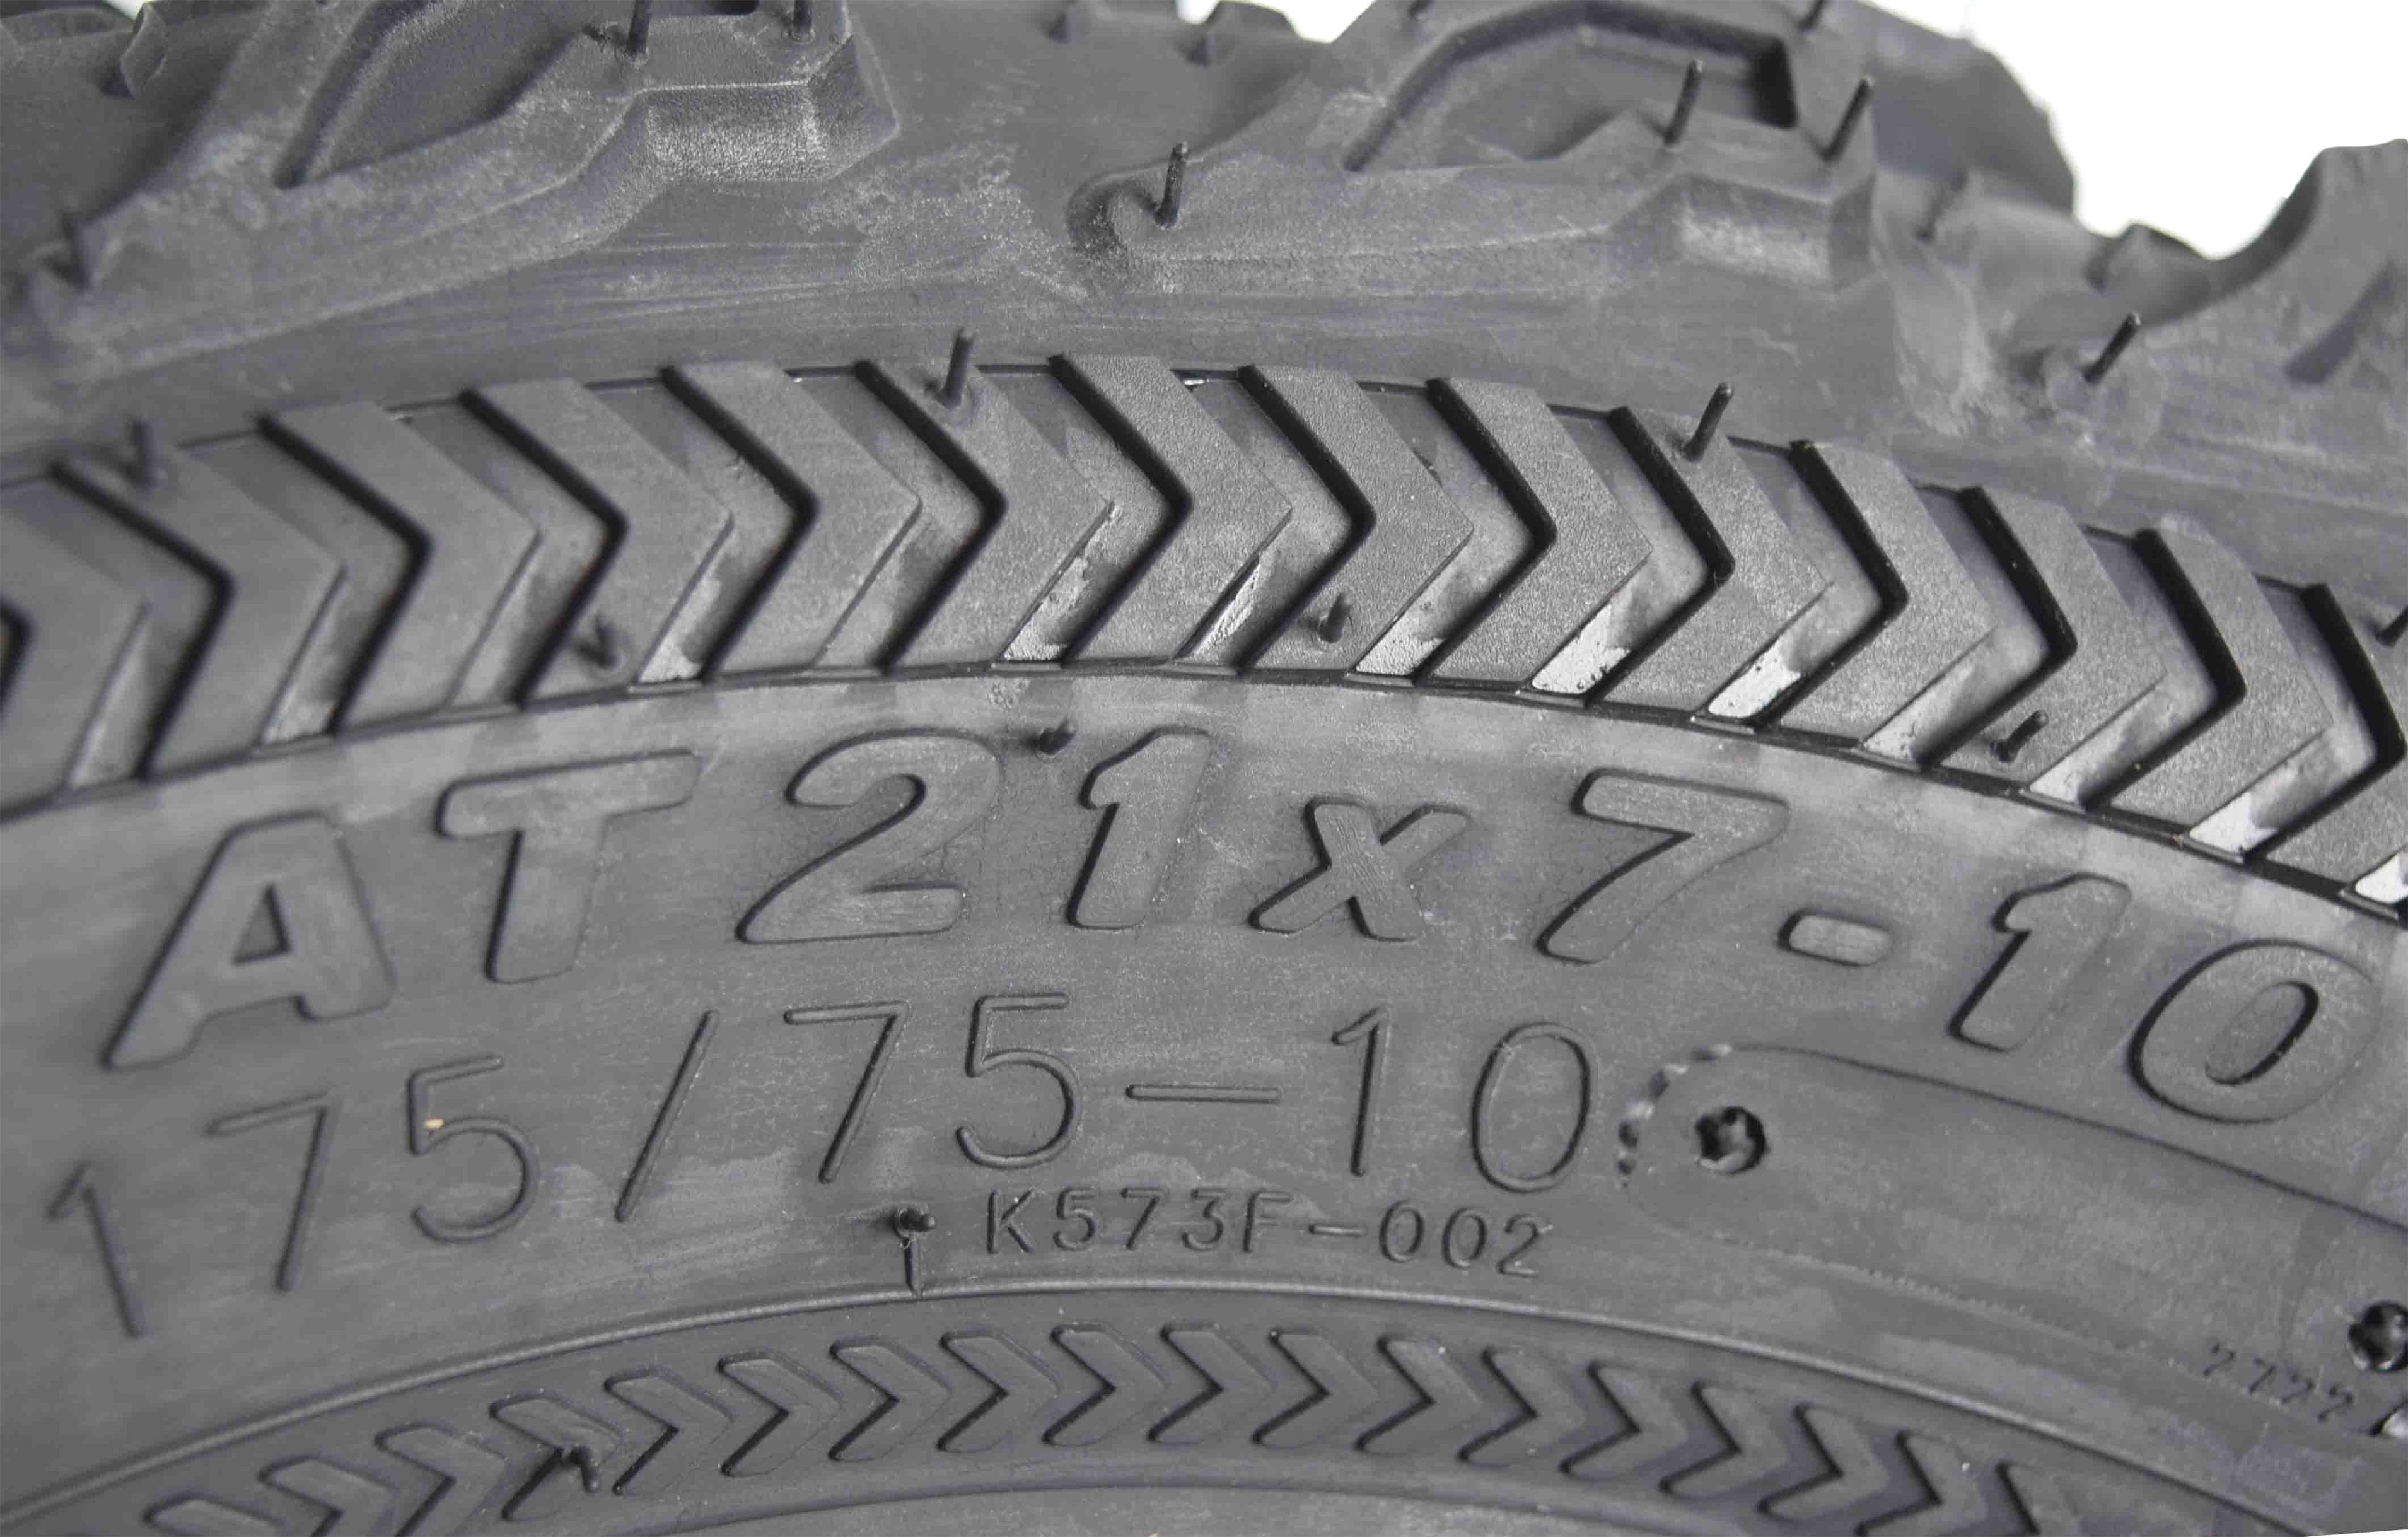 Kenda Bear Claw EX 21x7-10 Front ATV 6 PLY Tires Bearclaw 21x7x10 - 2 Pack